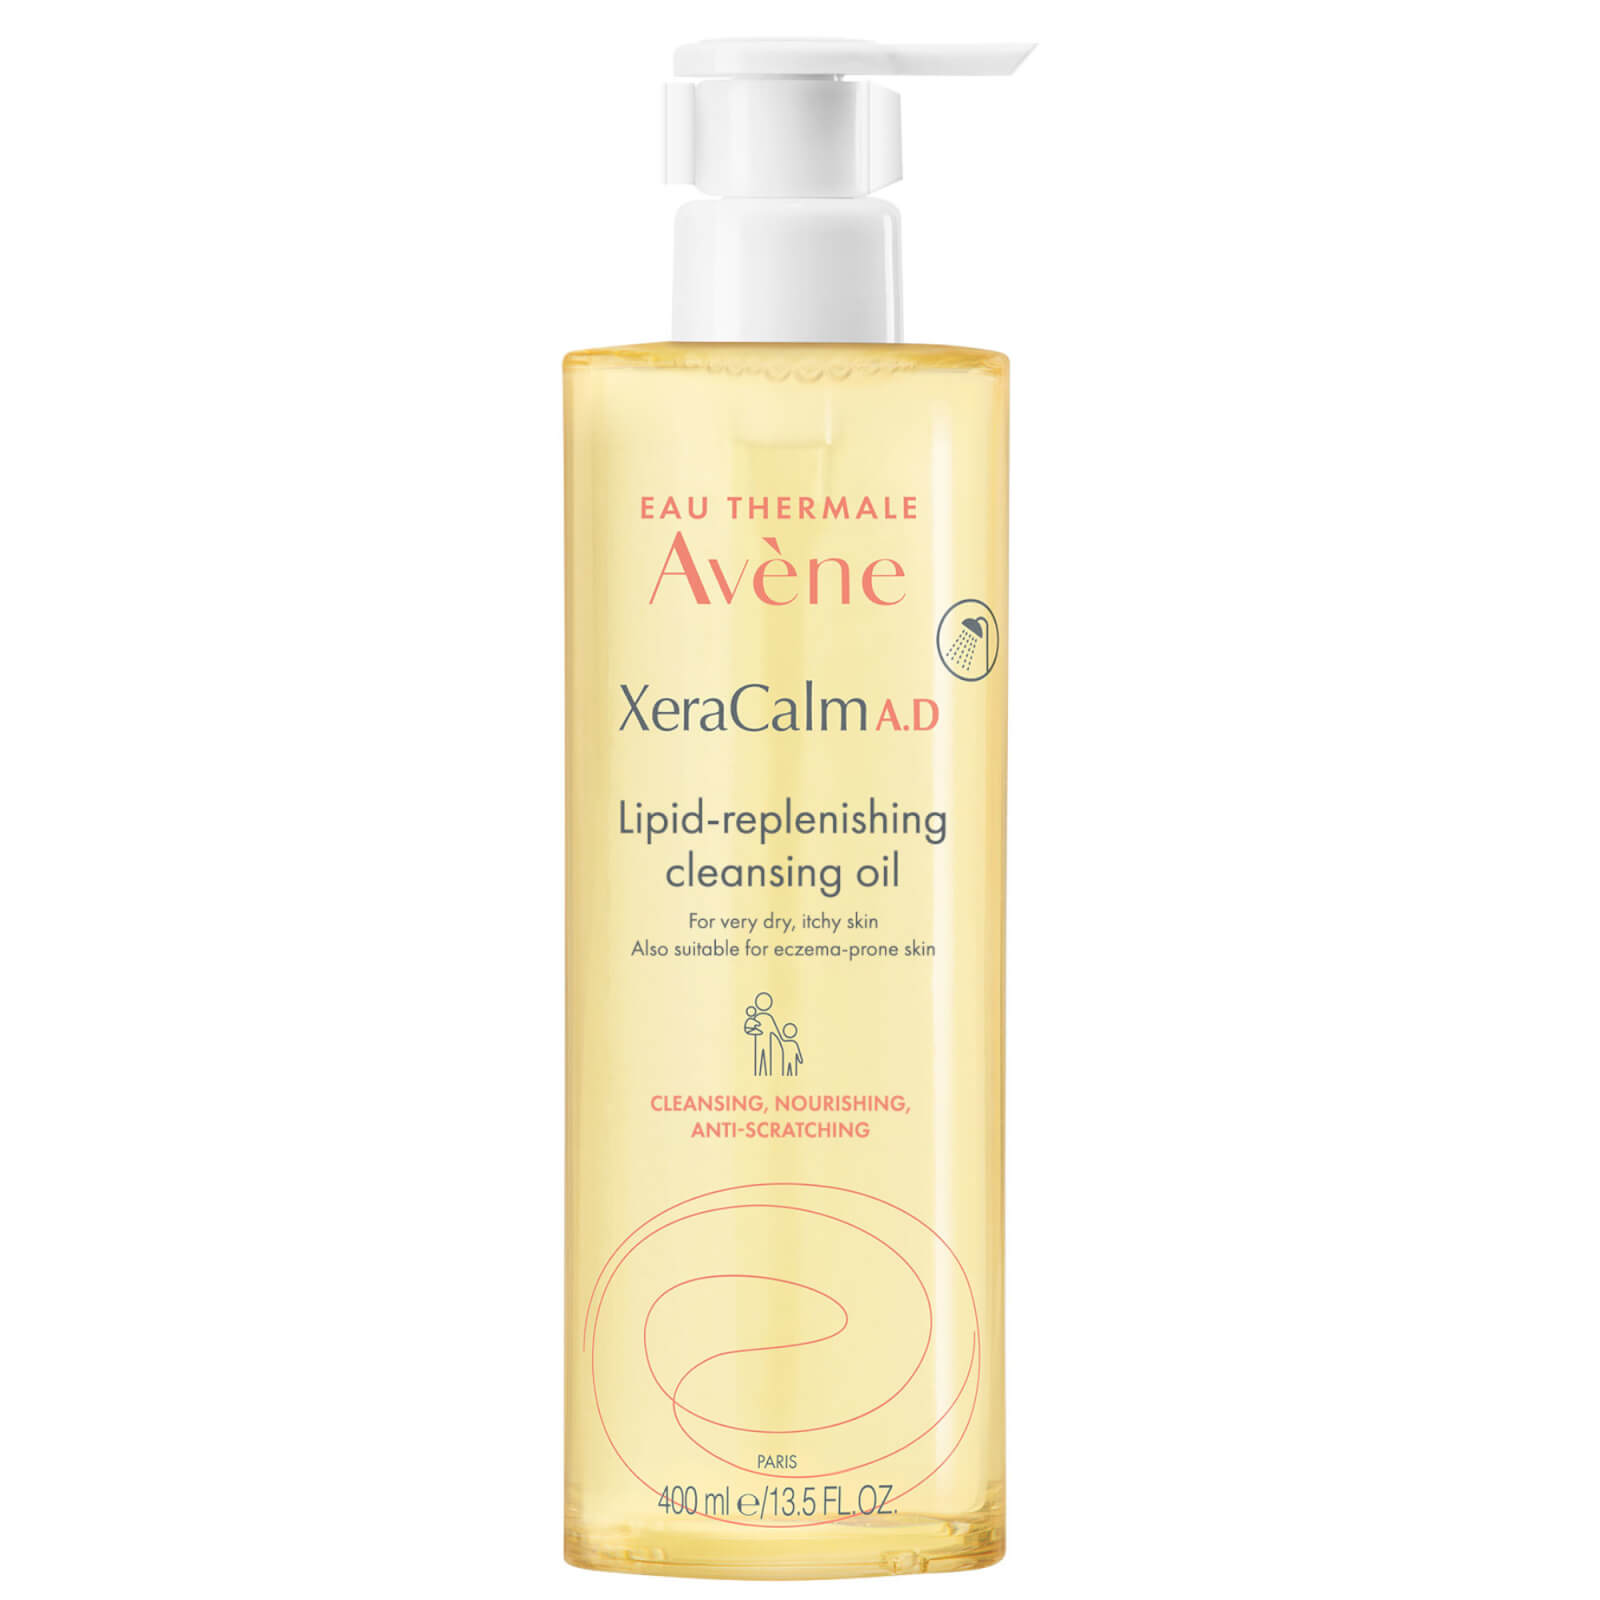 Avène XeraCalm A.D. Lipid-Replenishing Cleansing Oil for Very Dry, Itchy Skin 400ml lookfantastic.com imagine